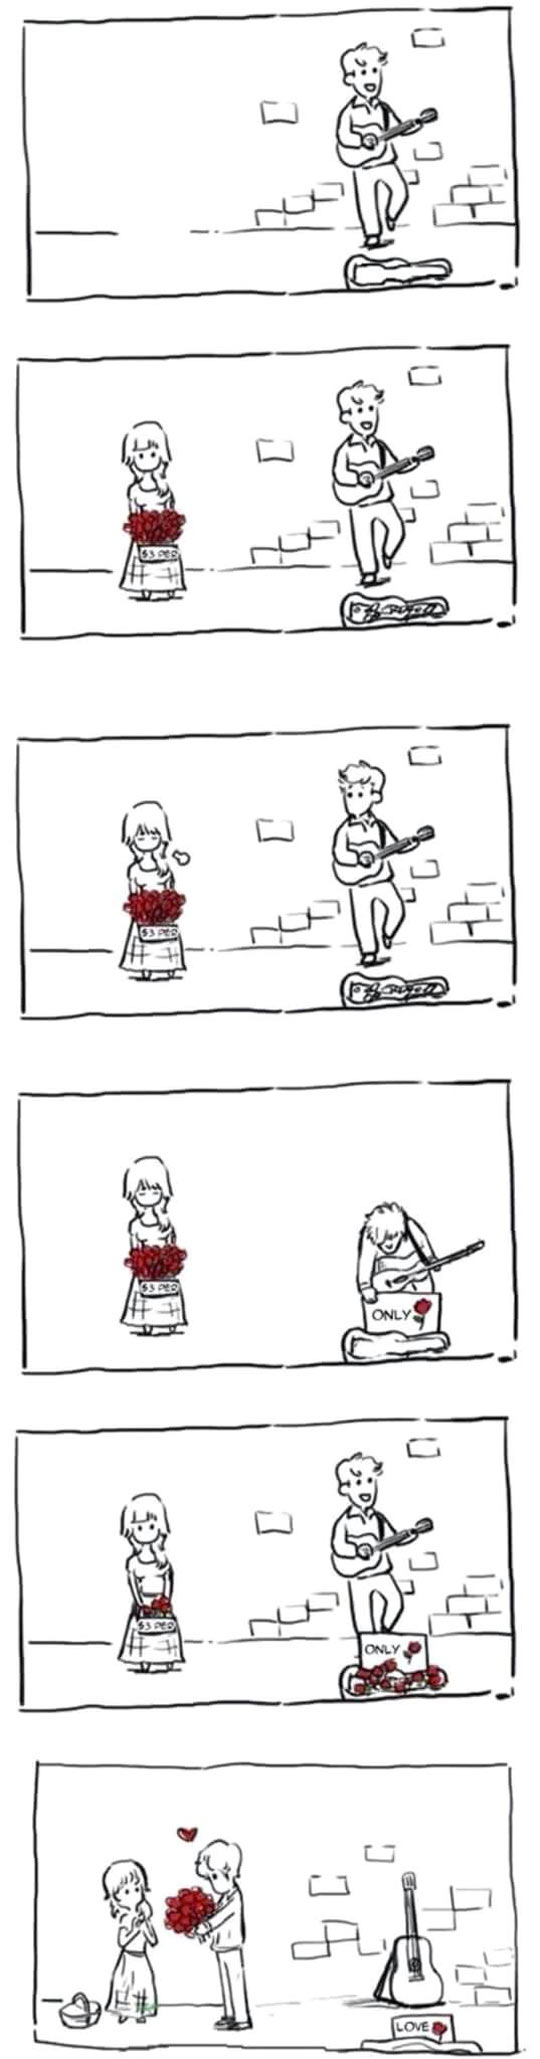 funny-roses-guitar-playing-street-comic